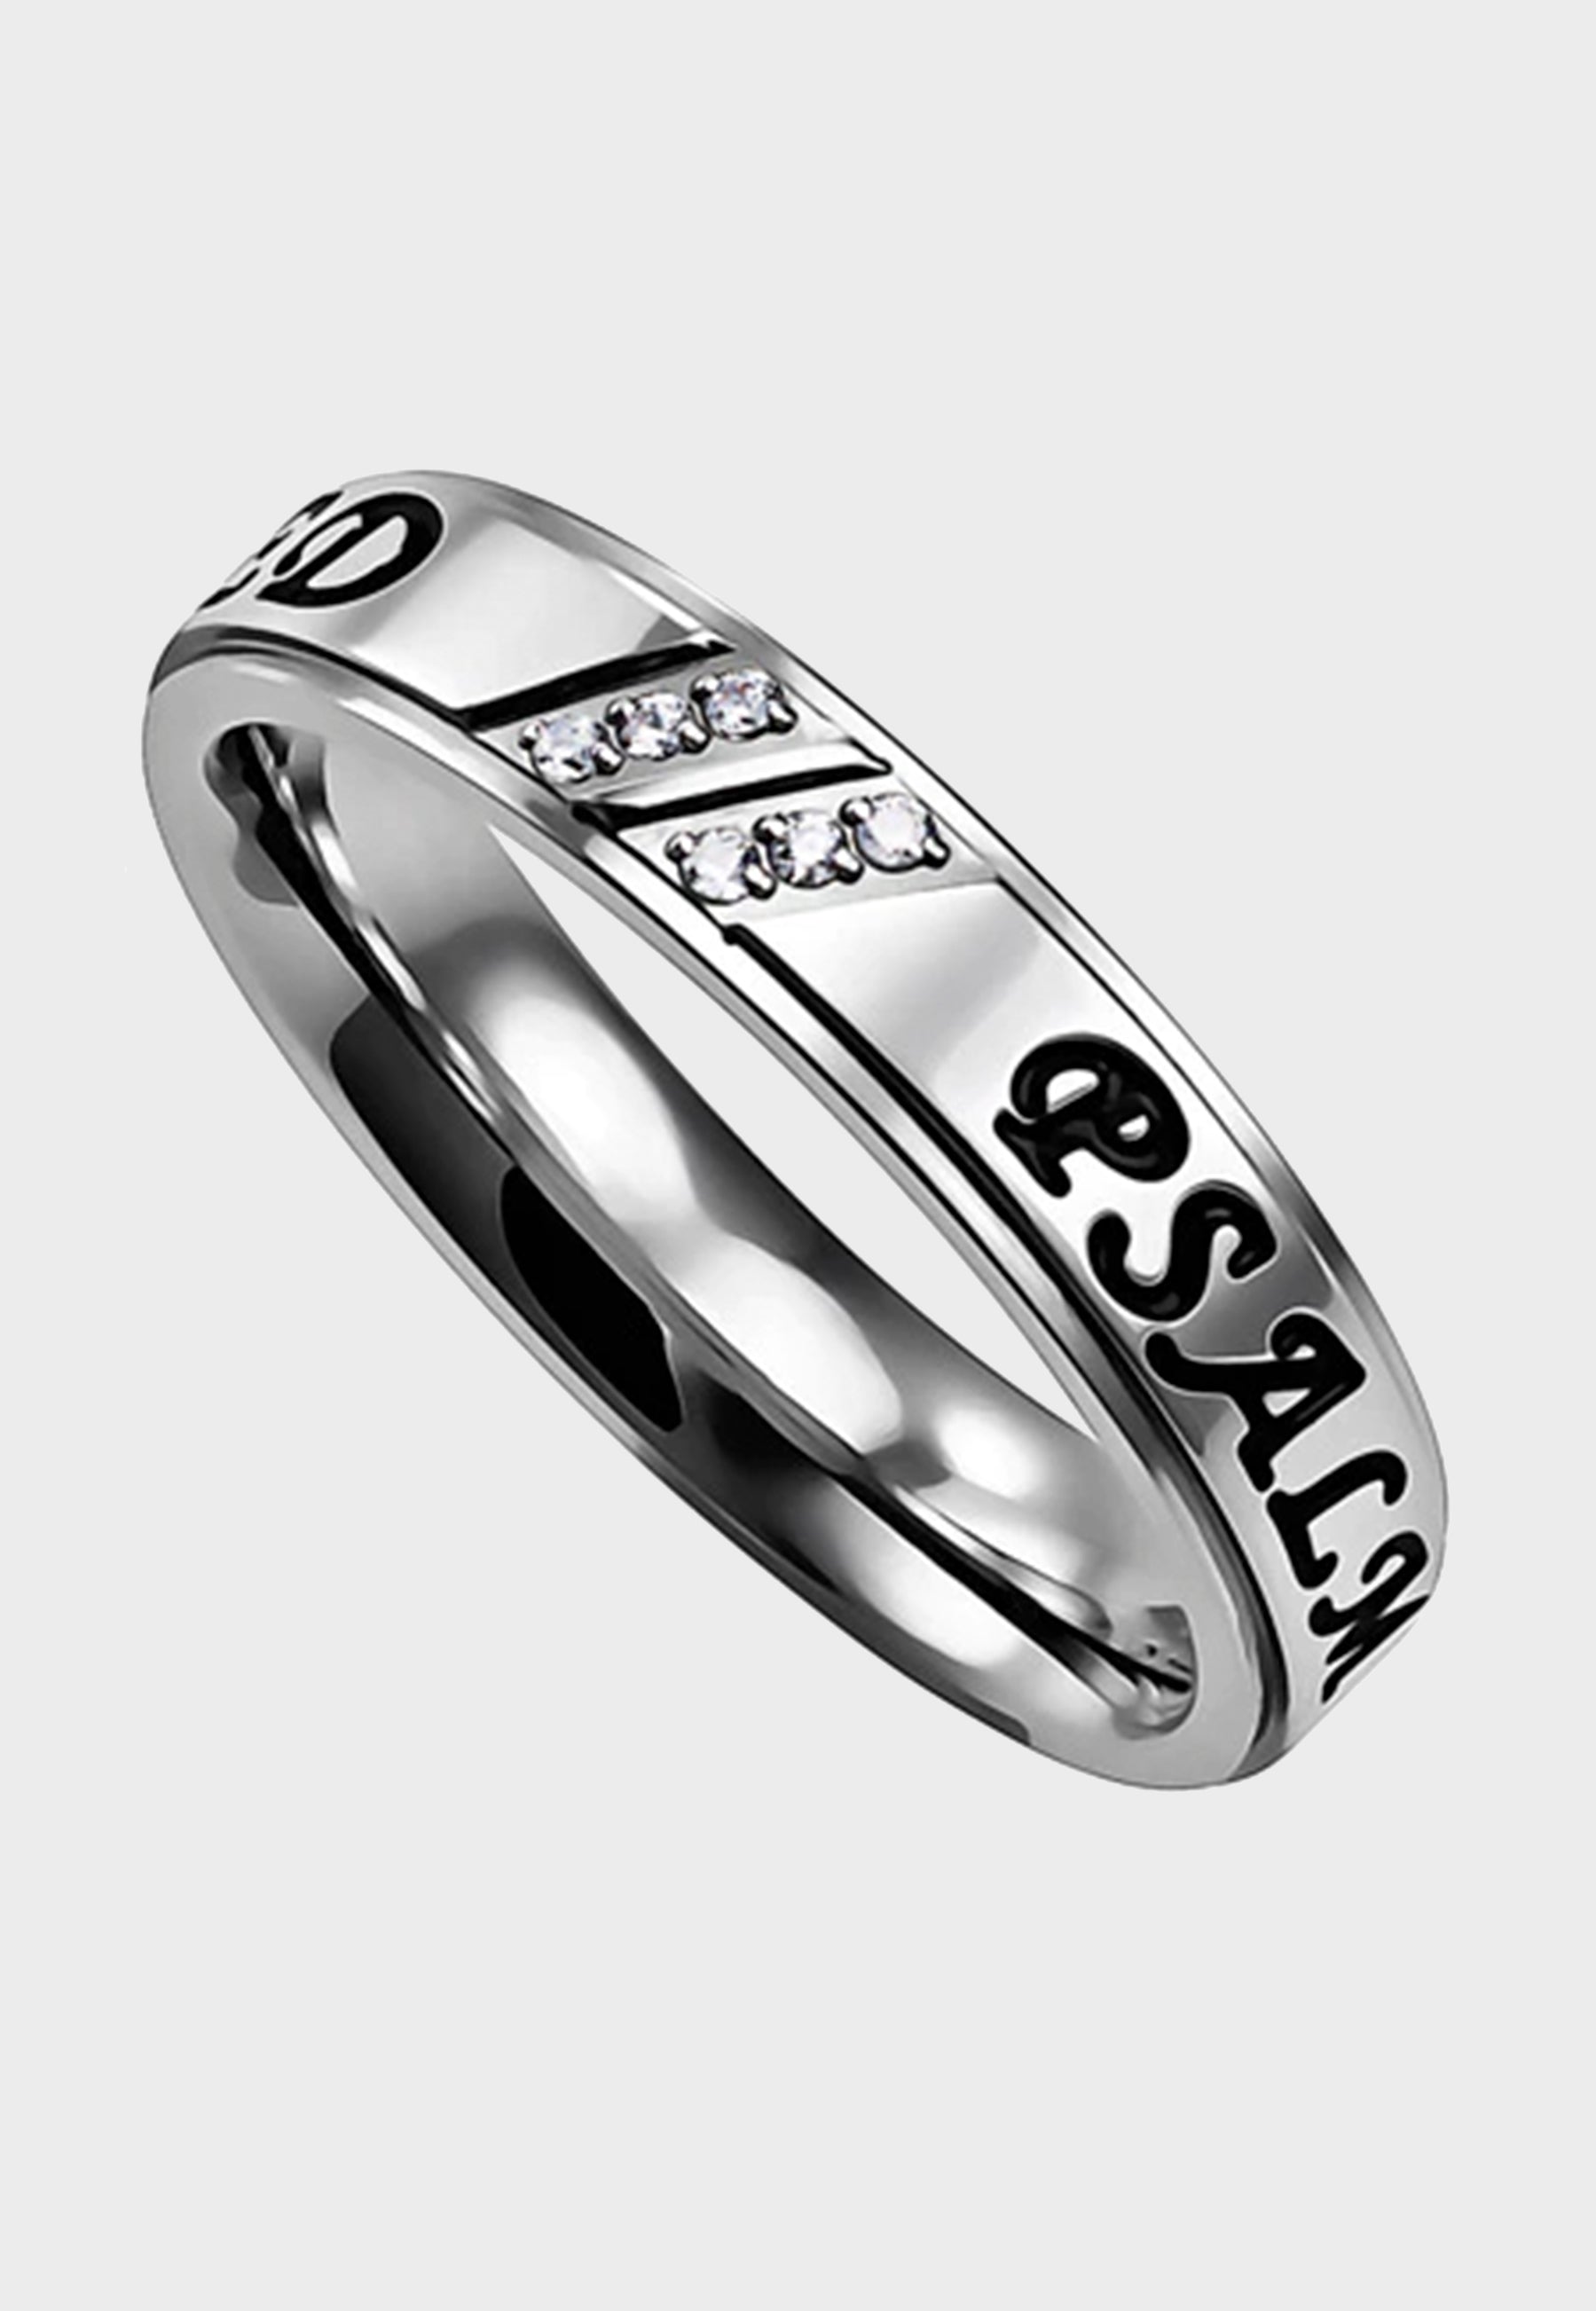 Christian ring for ladies with Psalm 34:8 inscribed